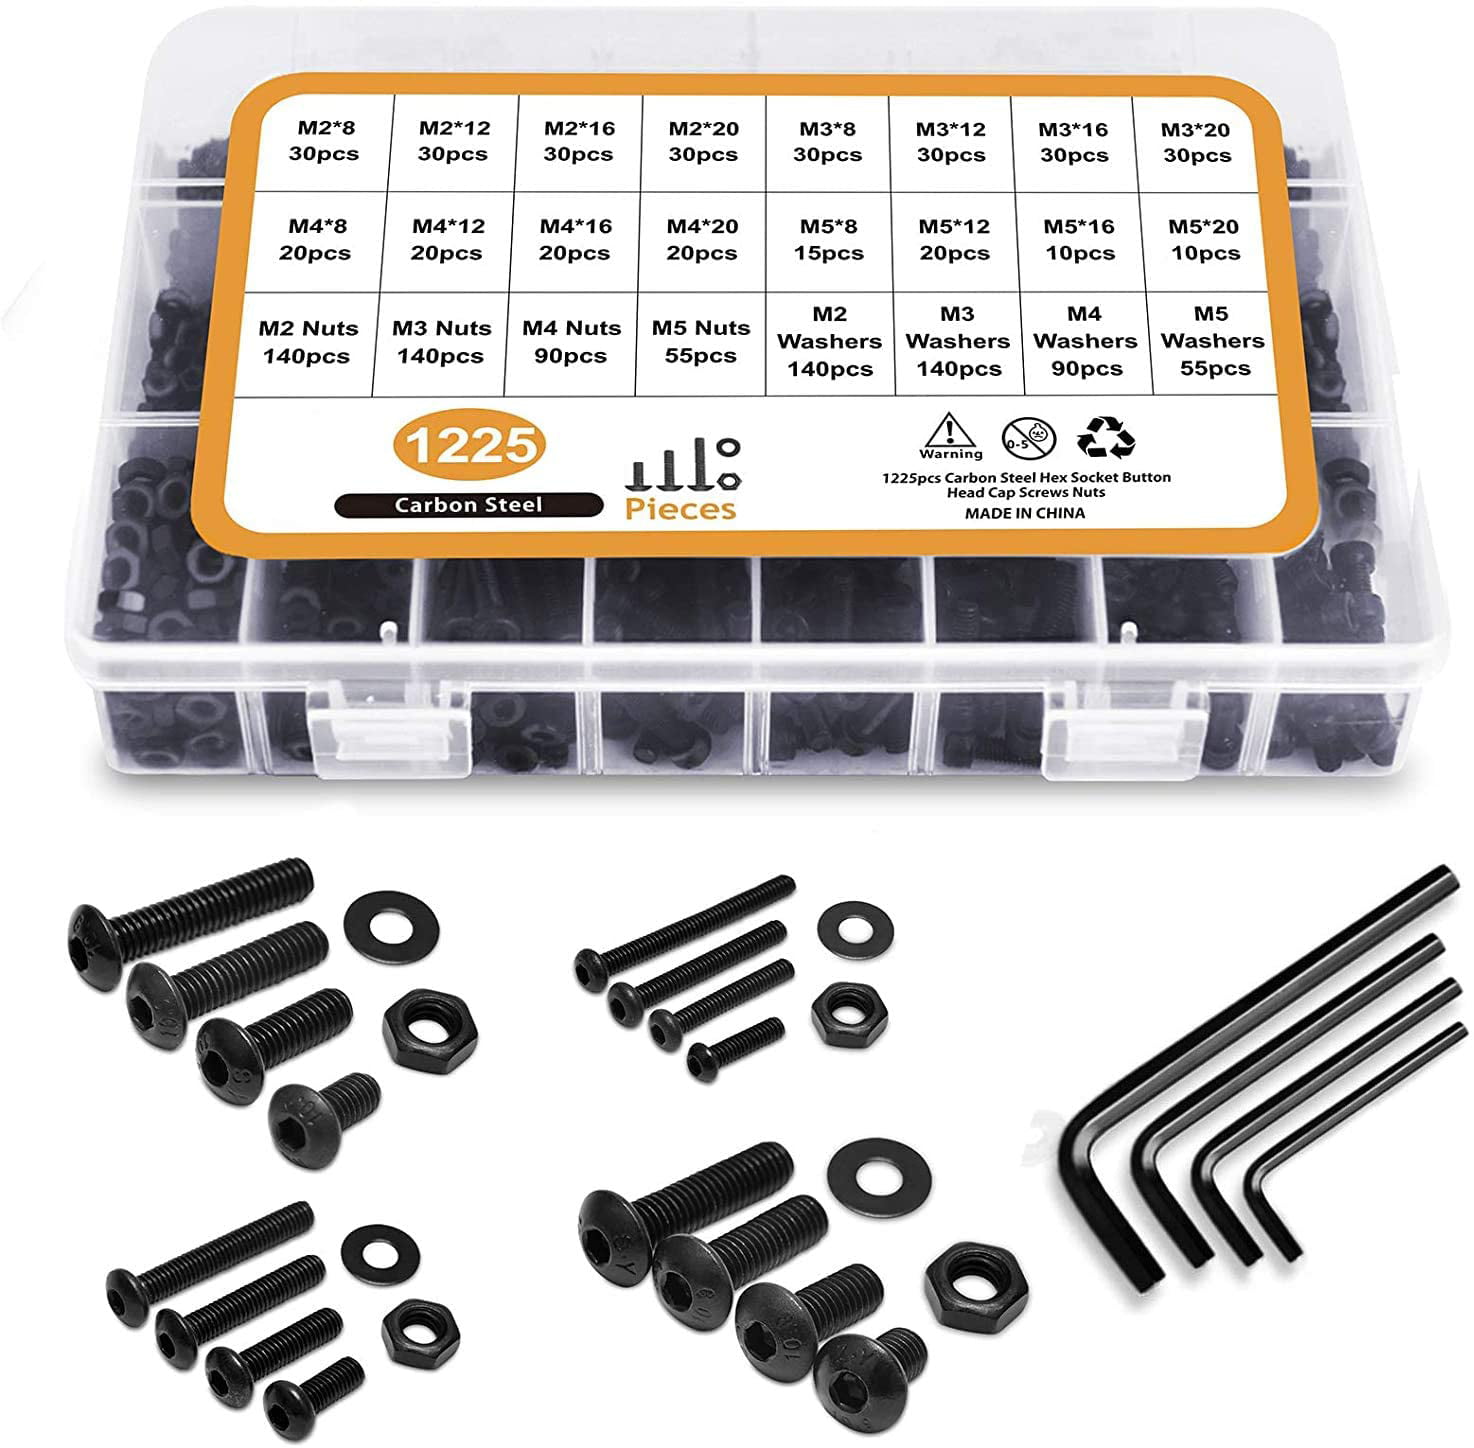 310 Pcs Allen Wrench Drive Black M3 Alloy Steel Hex Socket Head Cap Screws Nuts Assortment Kit Precise Metric Bolts and Nuts Set with Beautiful Assortment Tool Box for 3D Printed Project